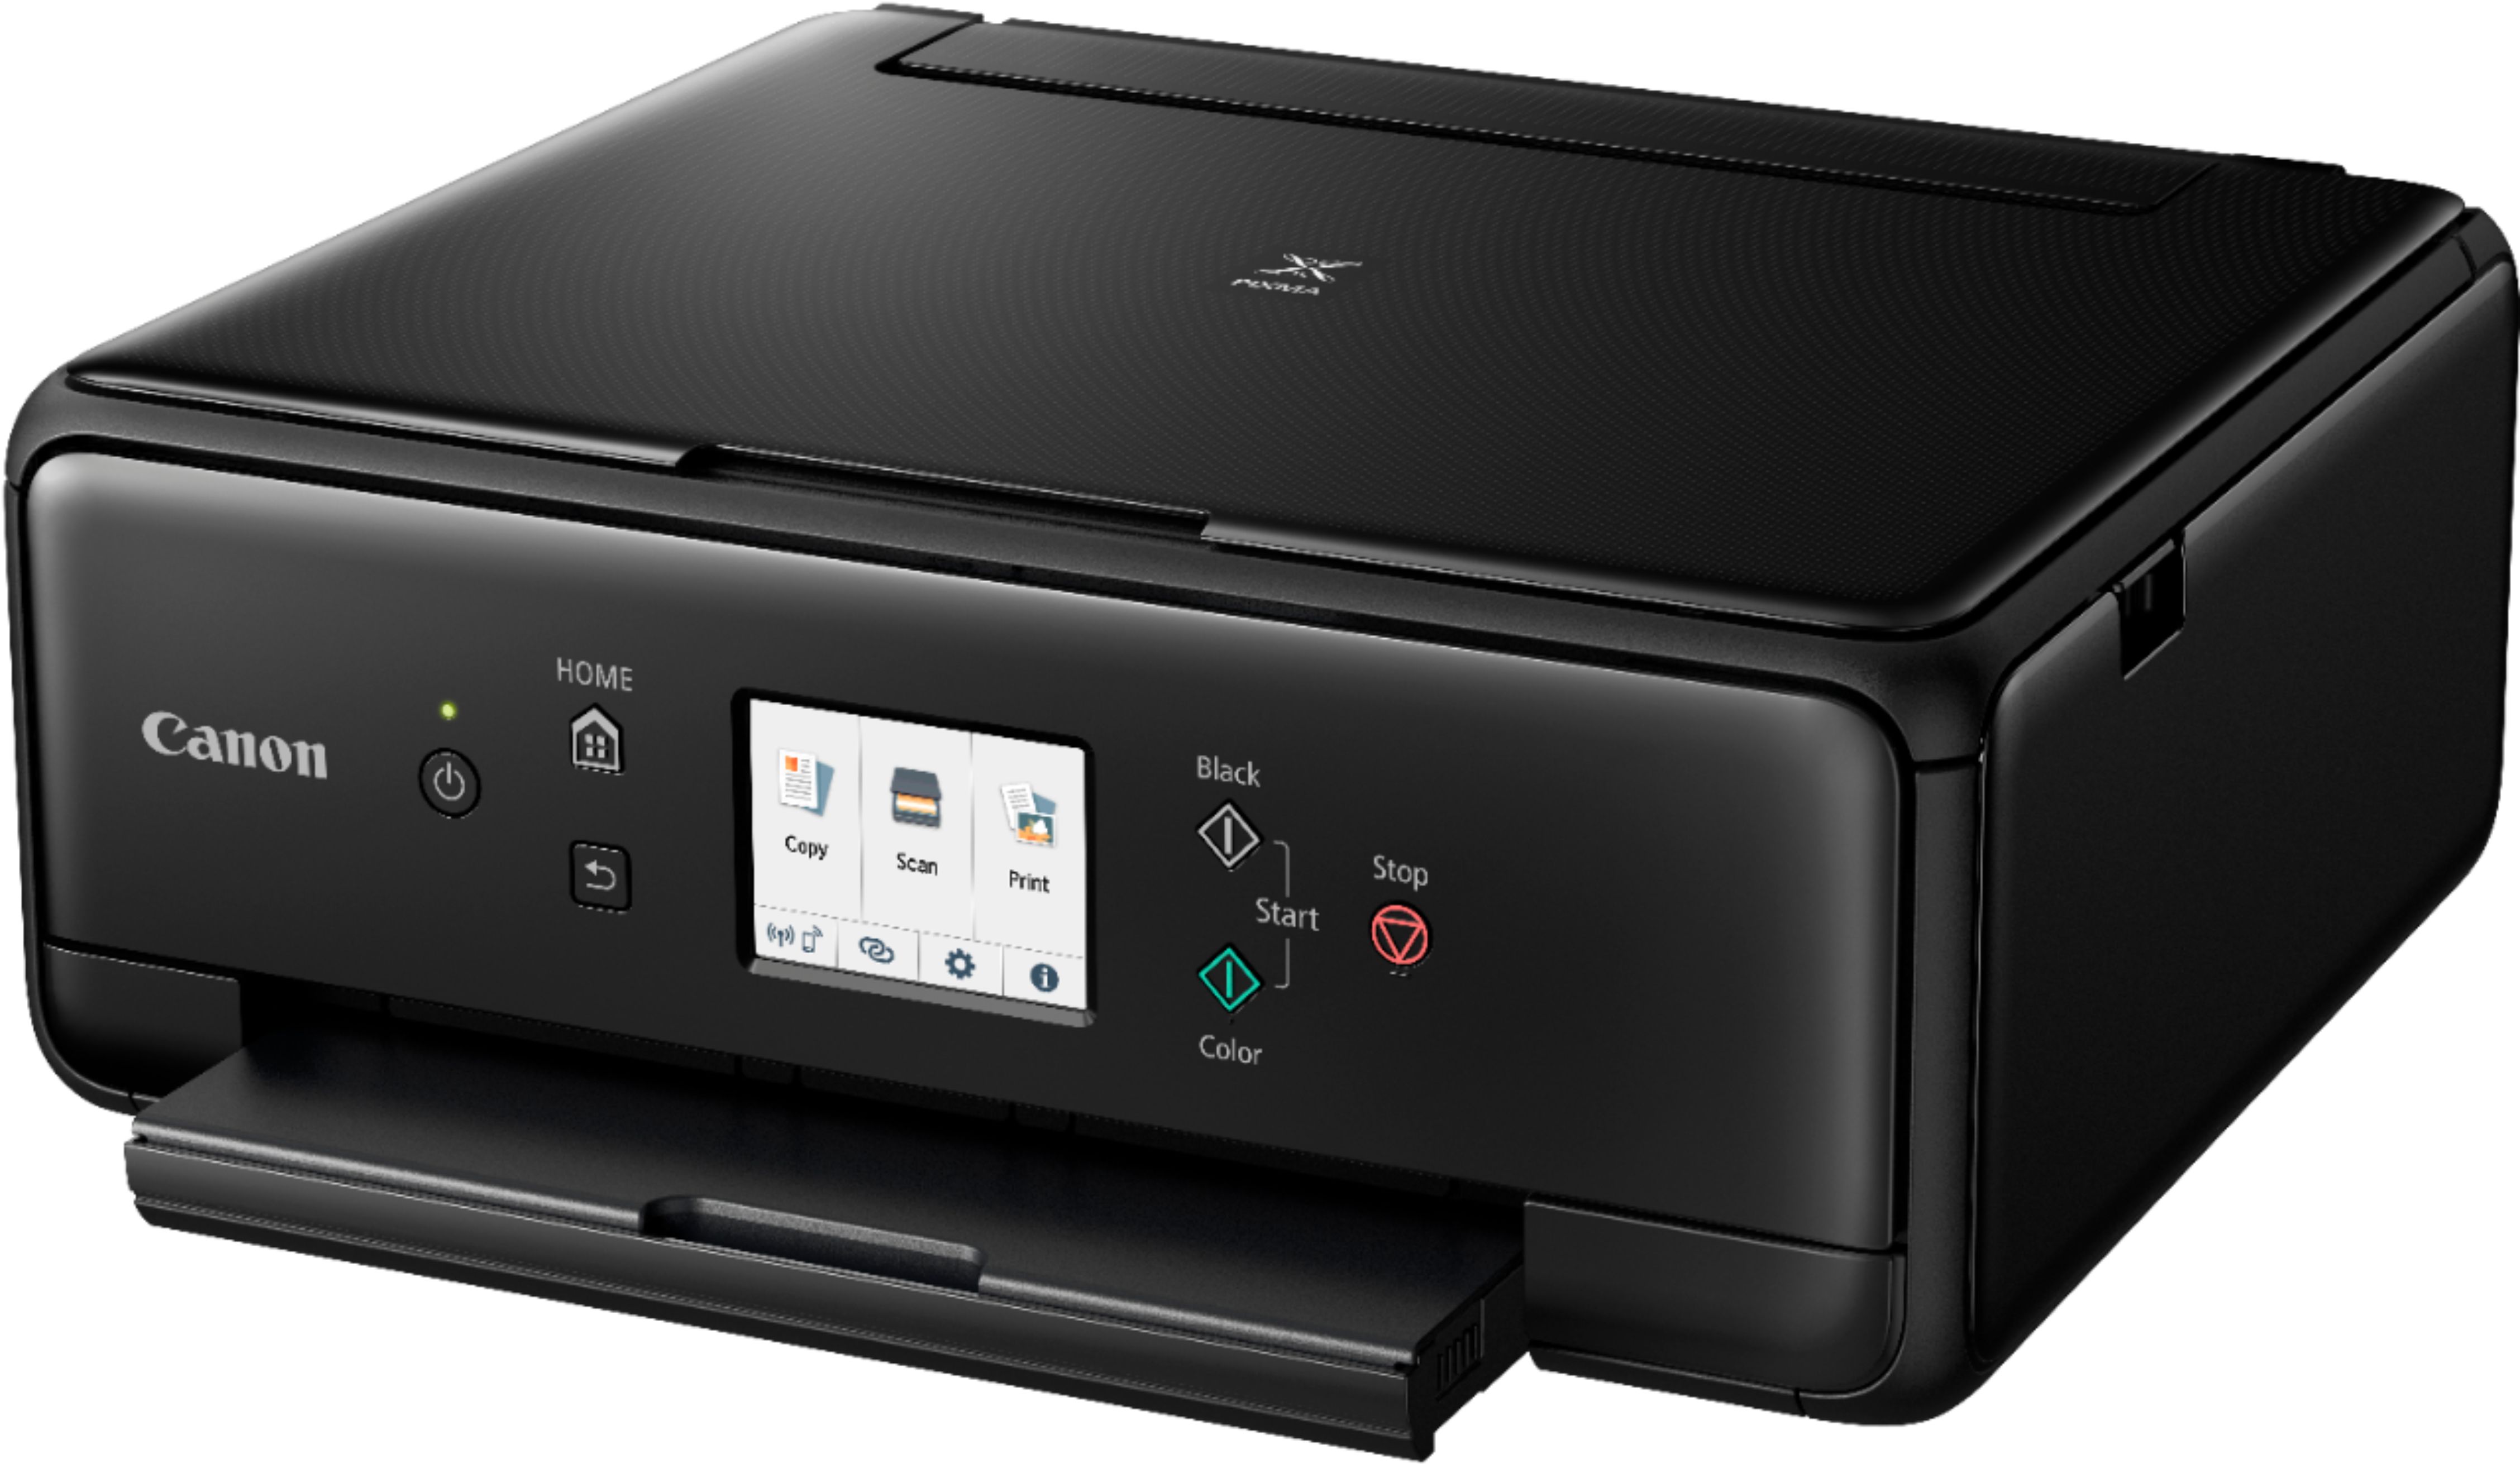 Questions and Answers: Canon PIXMA TS6220 Wireless All-In-One Inkjet